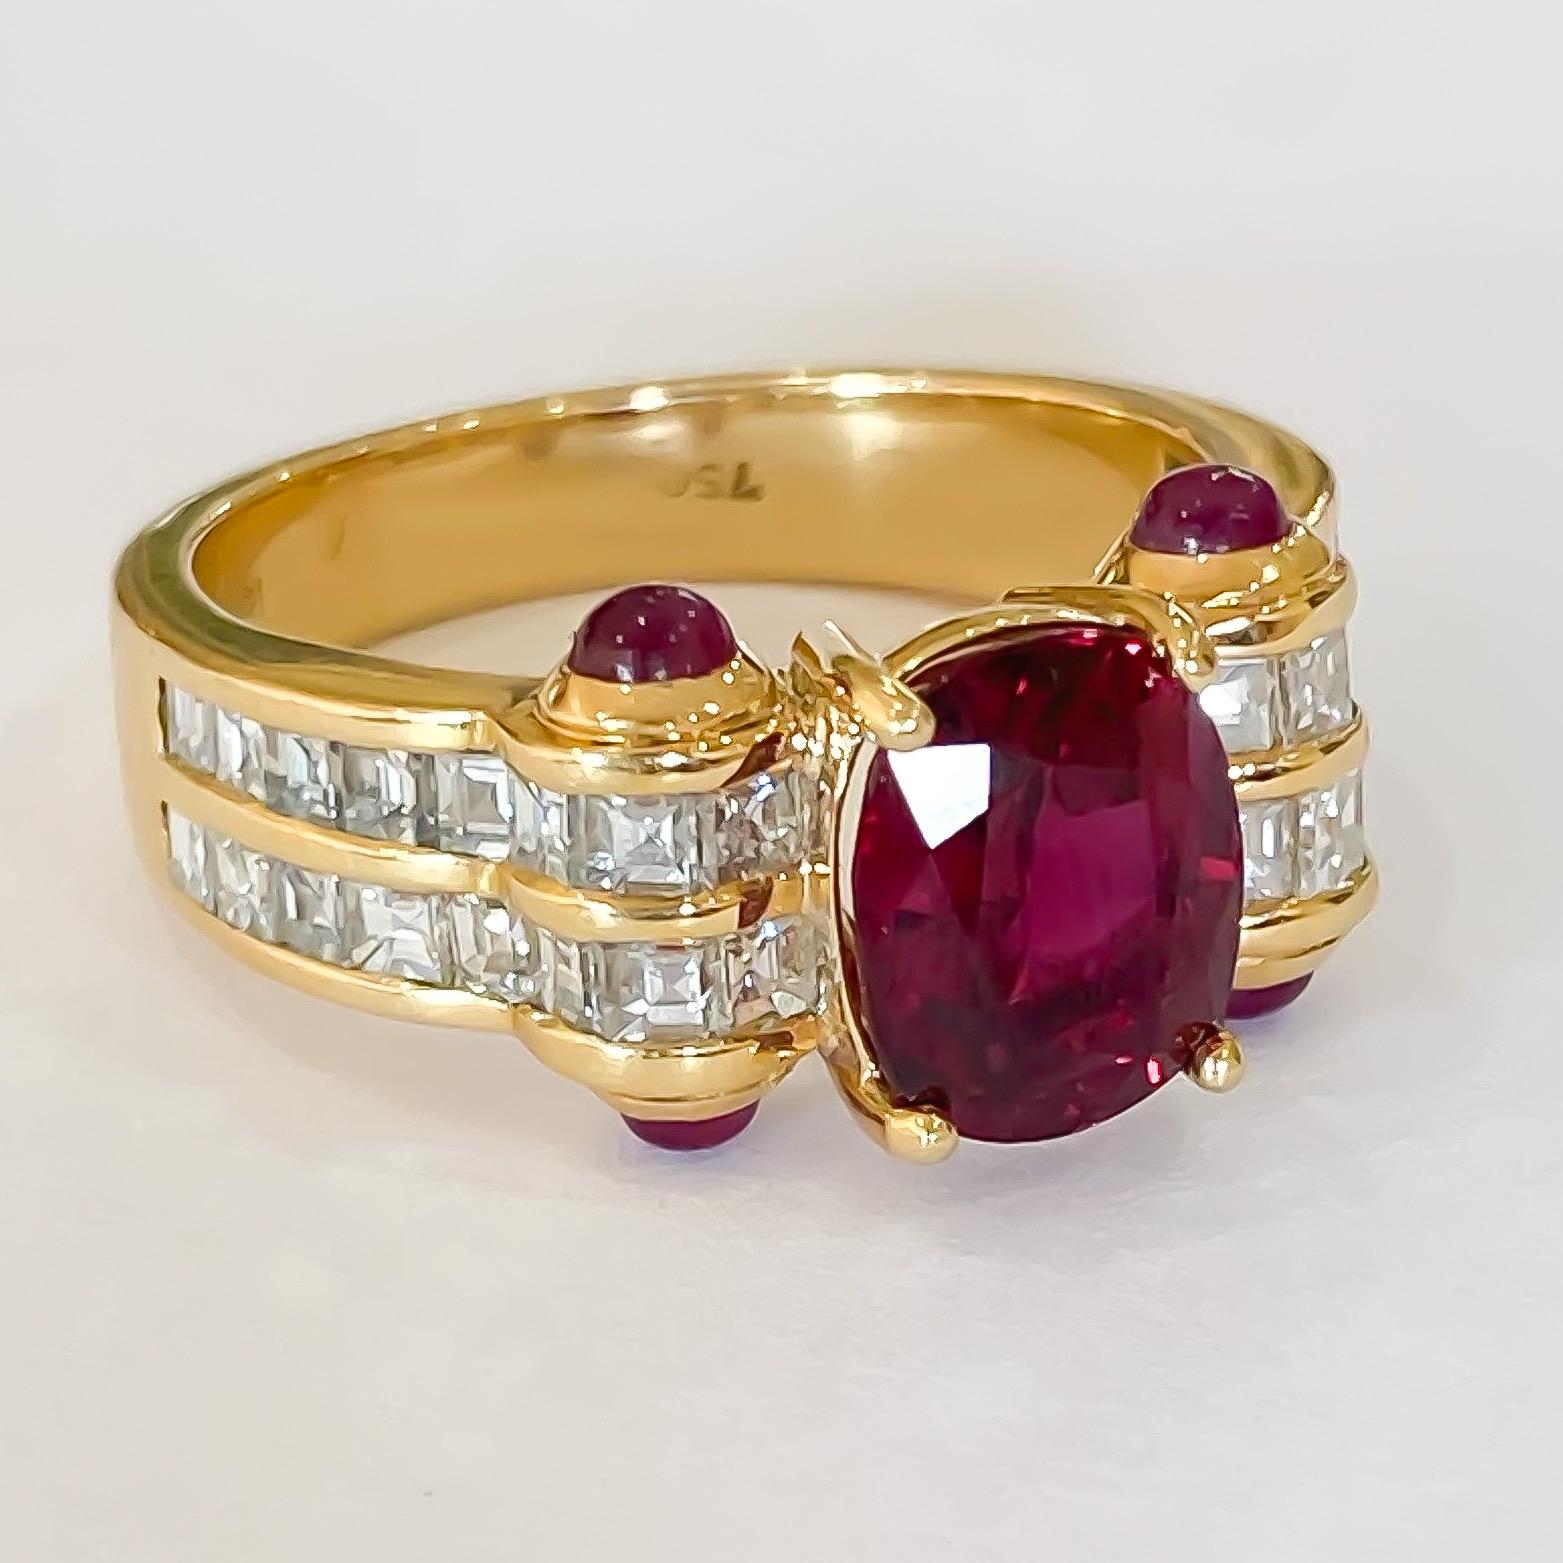 Natural Thai Ruby Oval and Cabochon Square Diamond Handmade Ring 18k 2.64 Carat In Excellent Condition For Sale In Carmel-by-the-Sea, CA